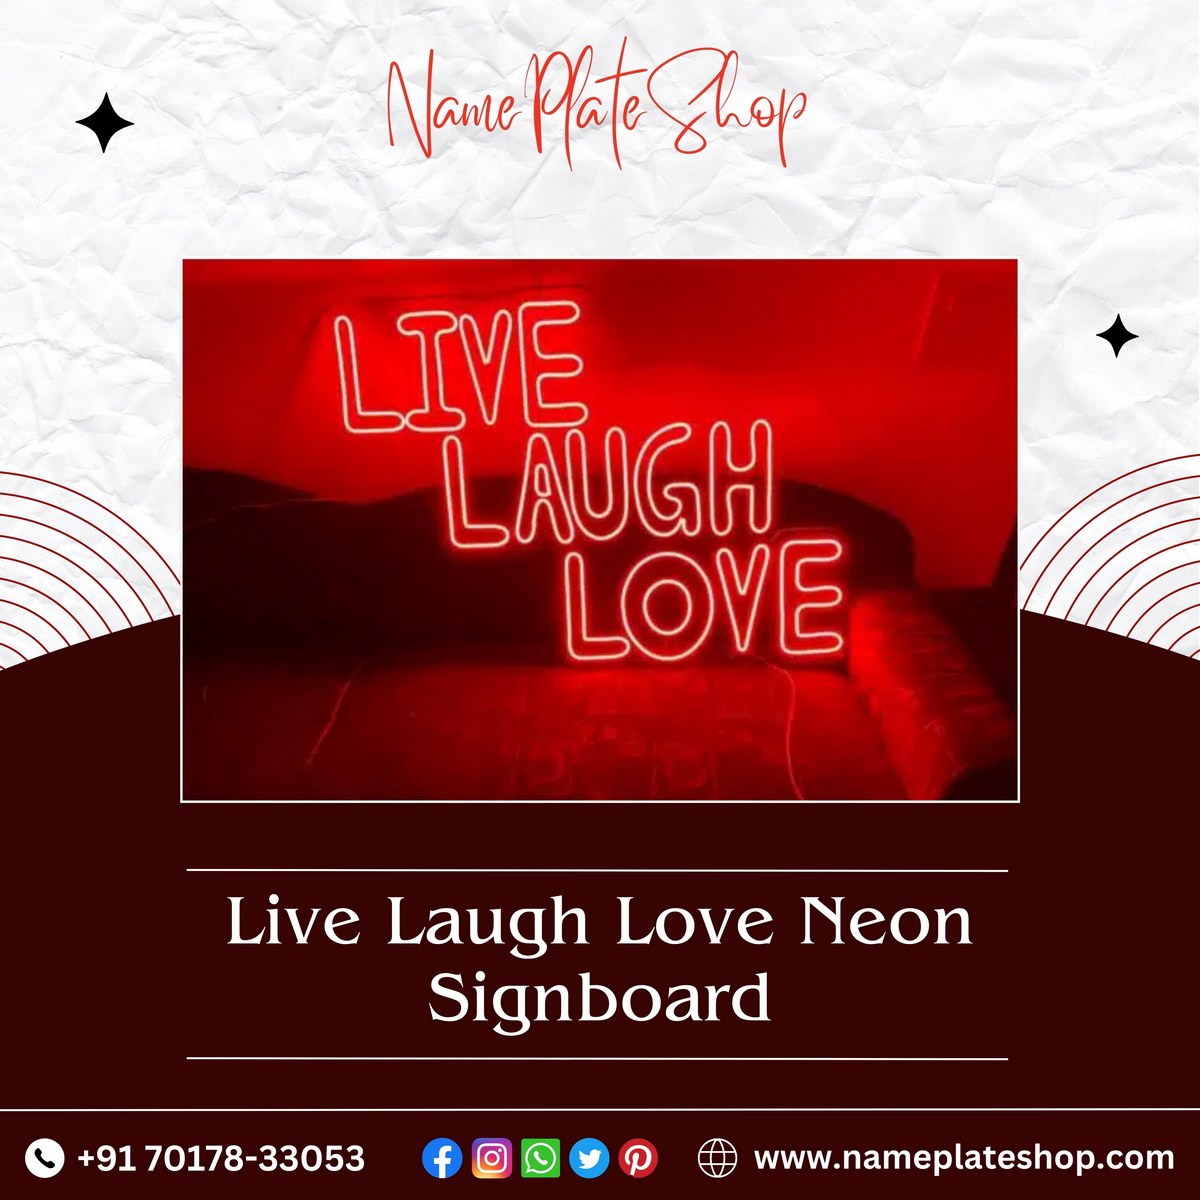 Live Laugh Love Neon Signboard Shine With Joy Everyday